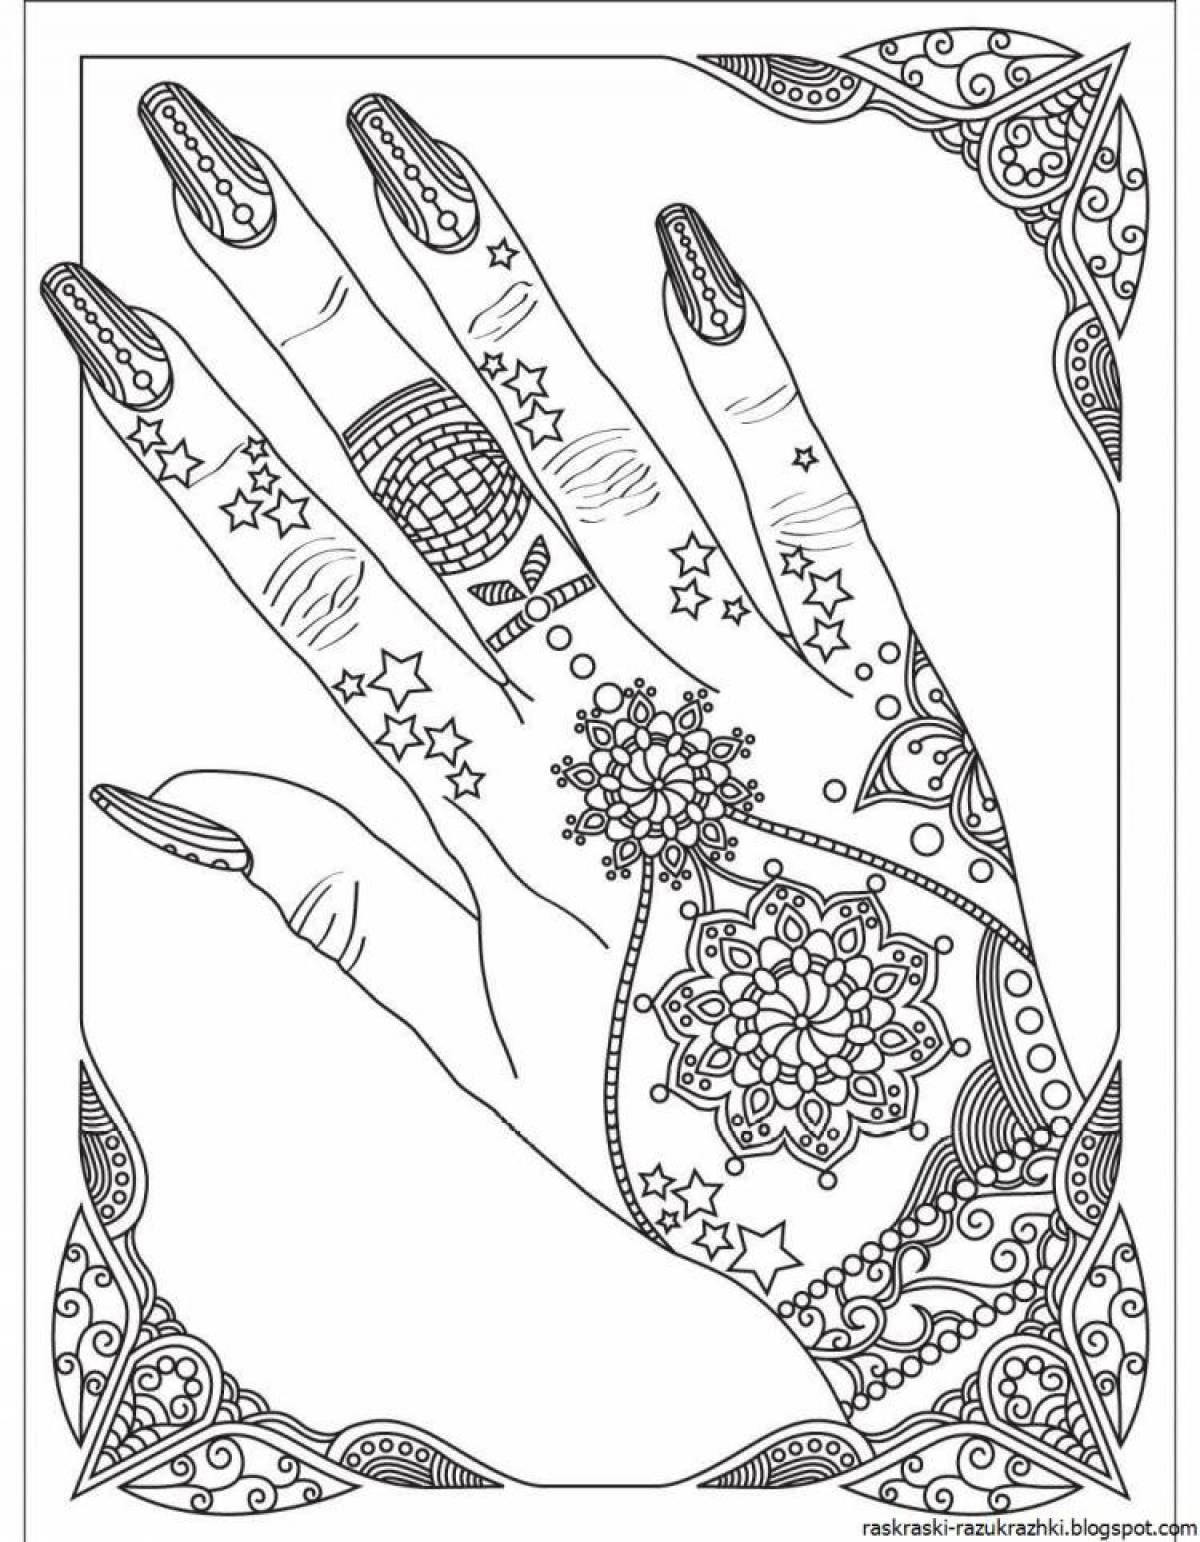 Coloring book joyful hand with nails